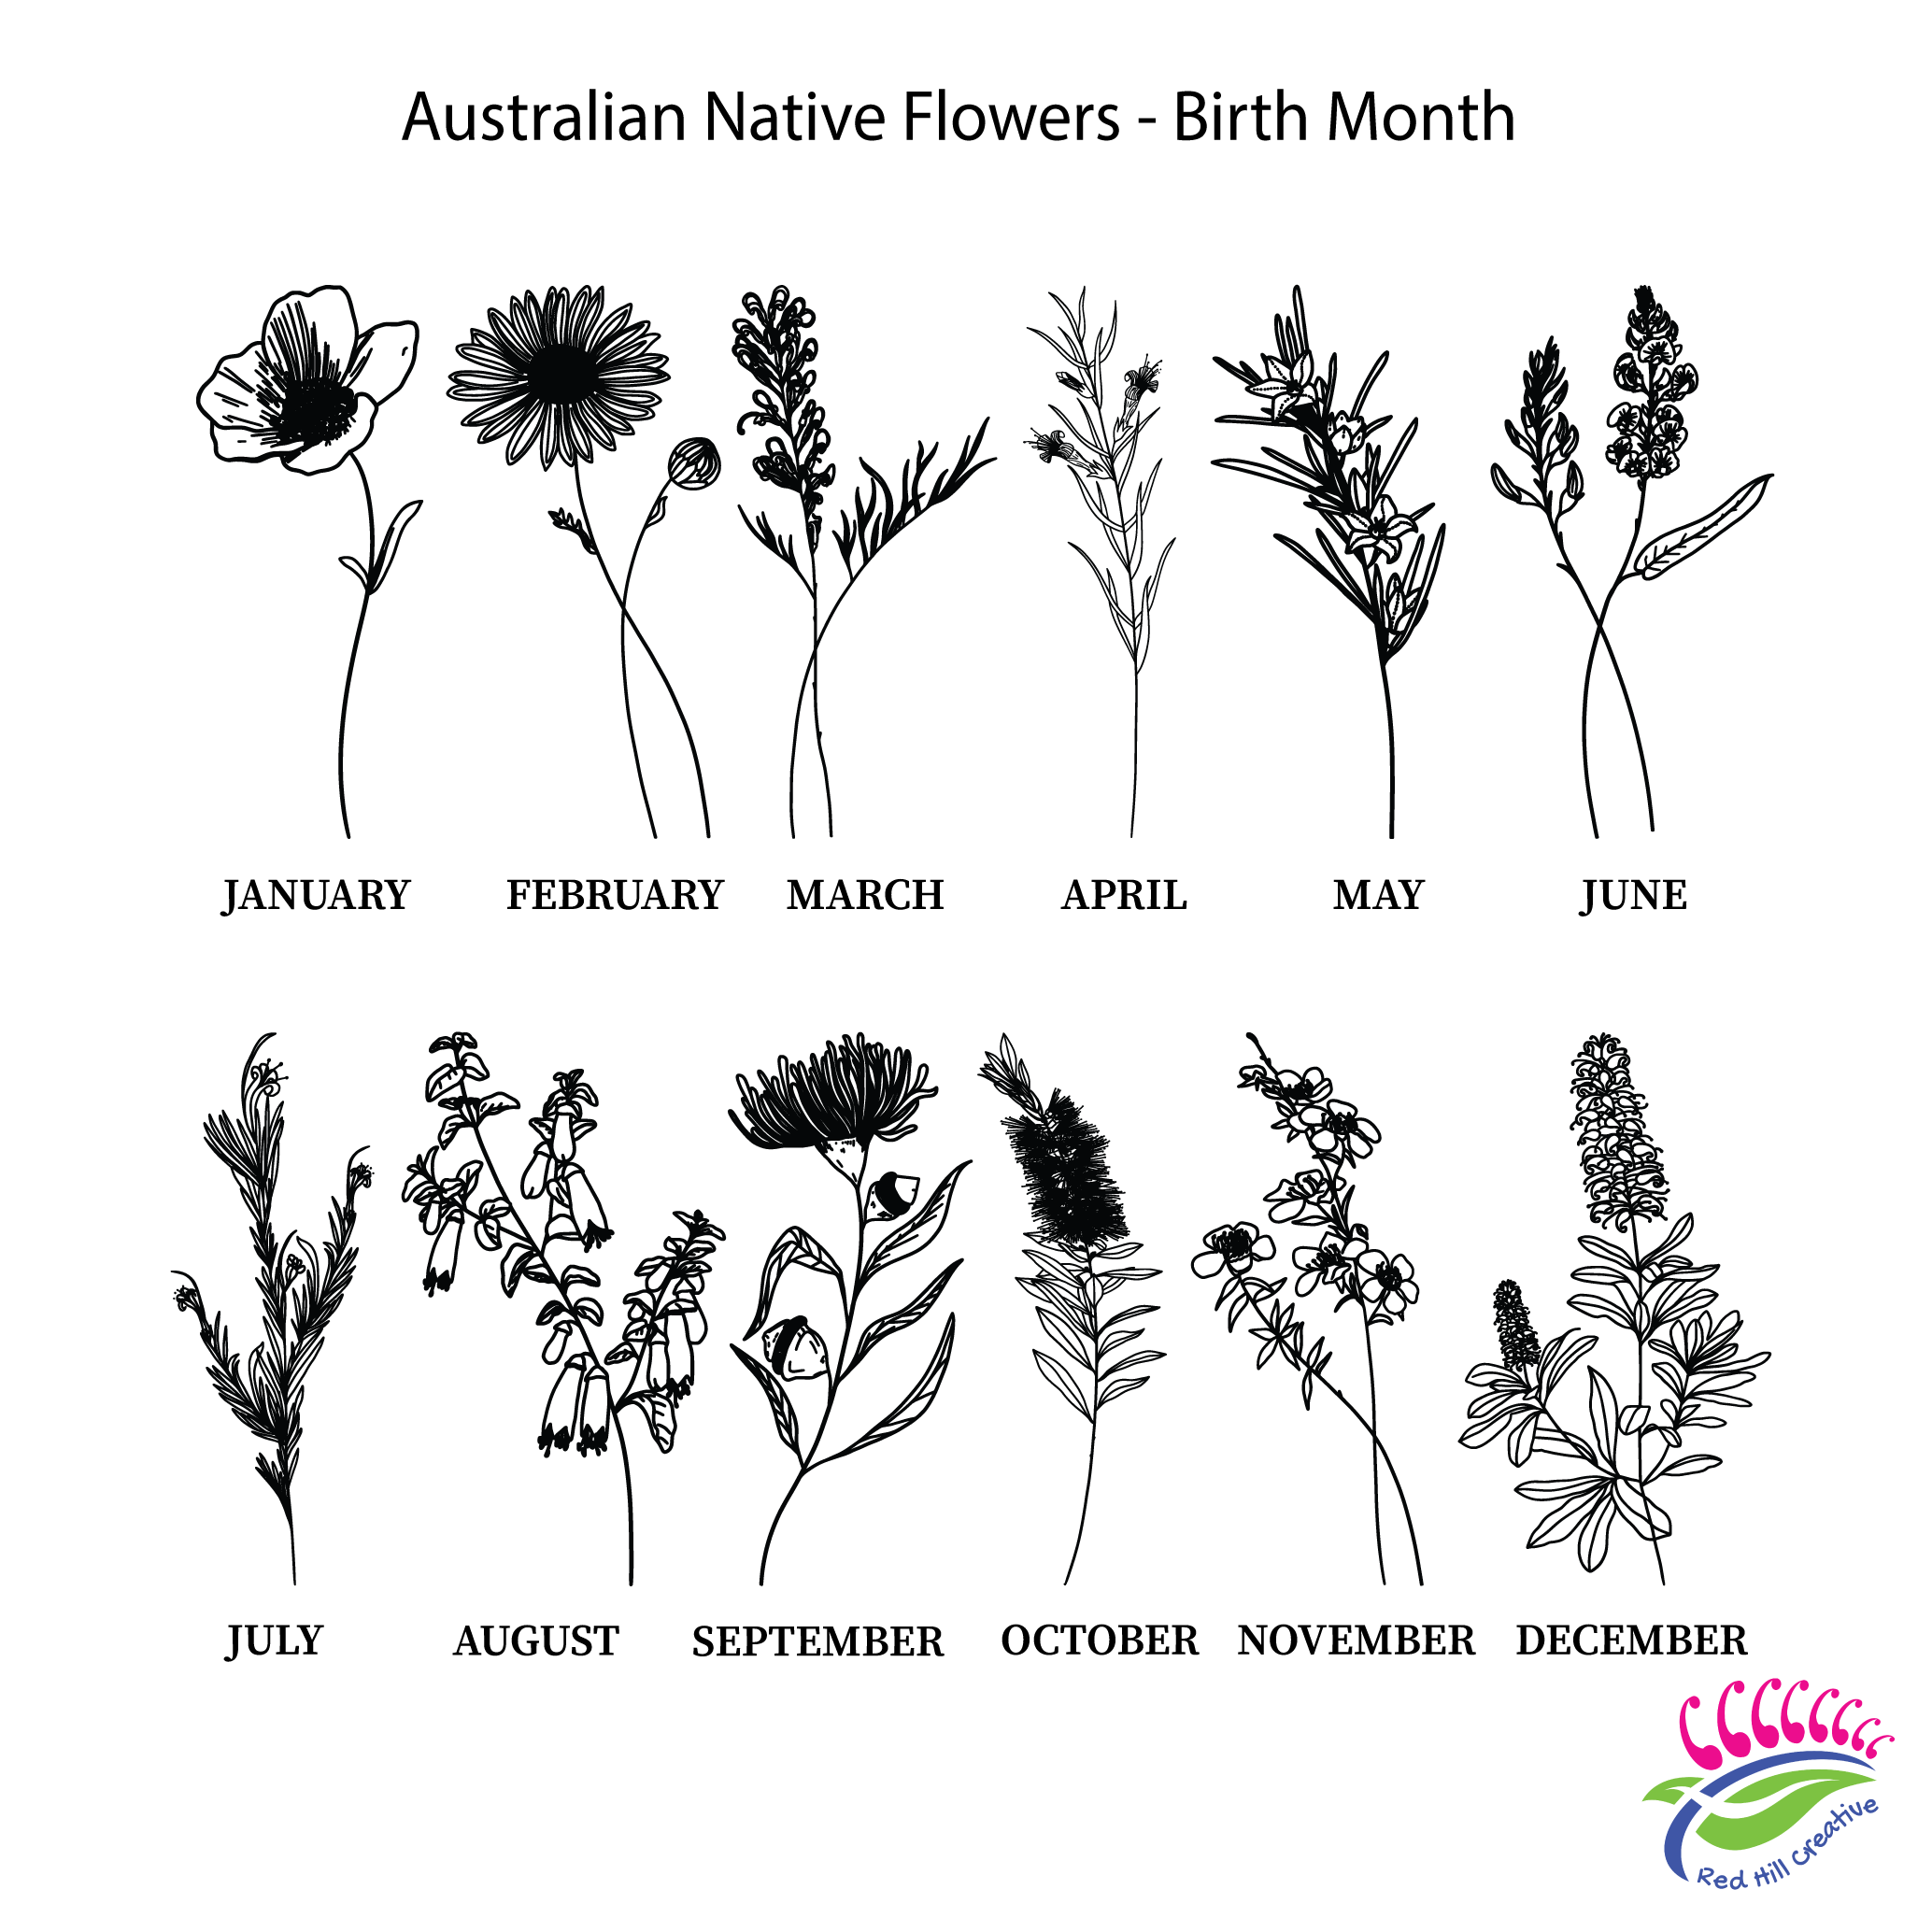 Carnation january birth month flower Royalty Free Vector